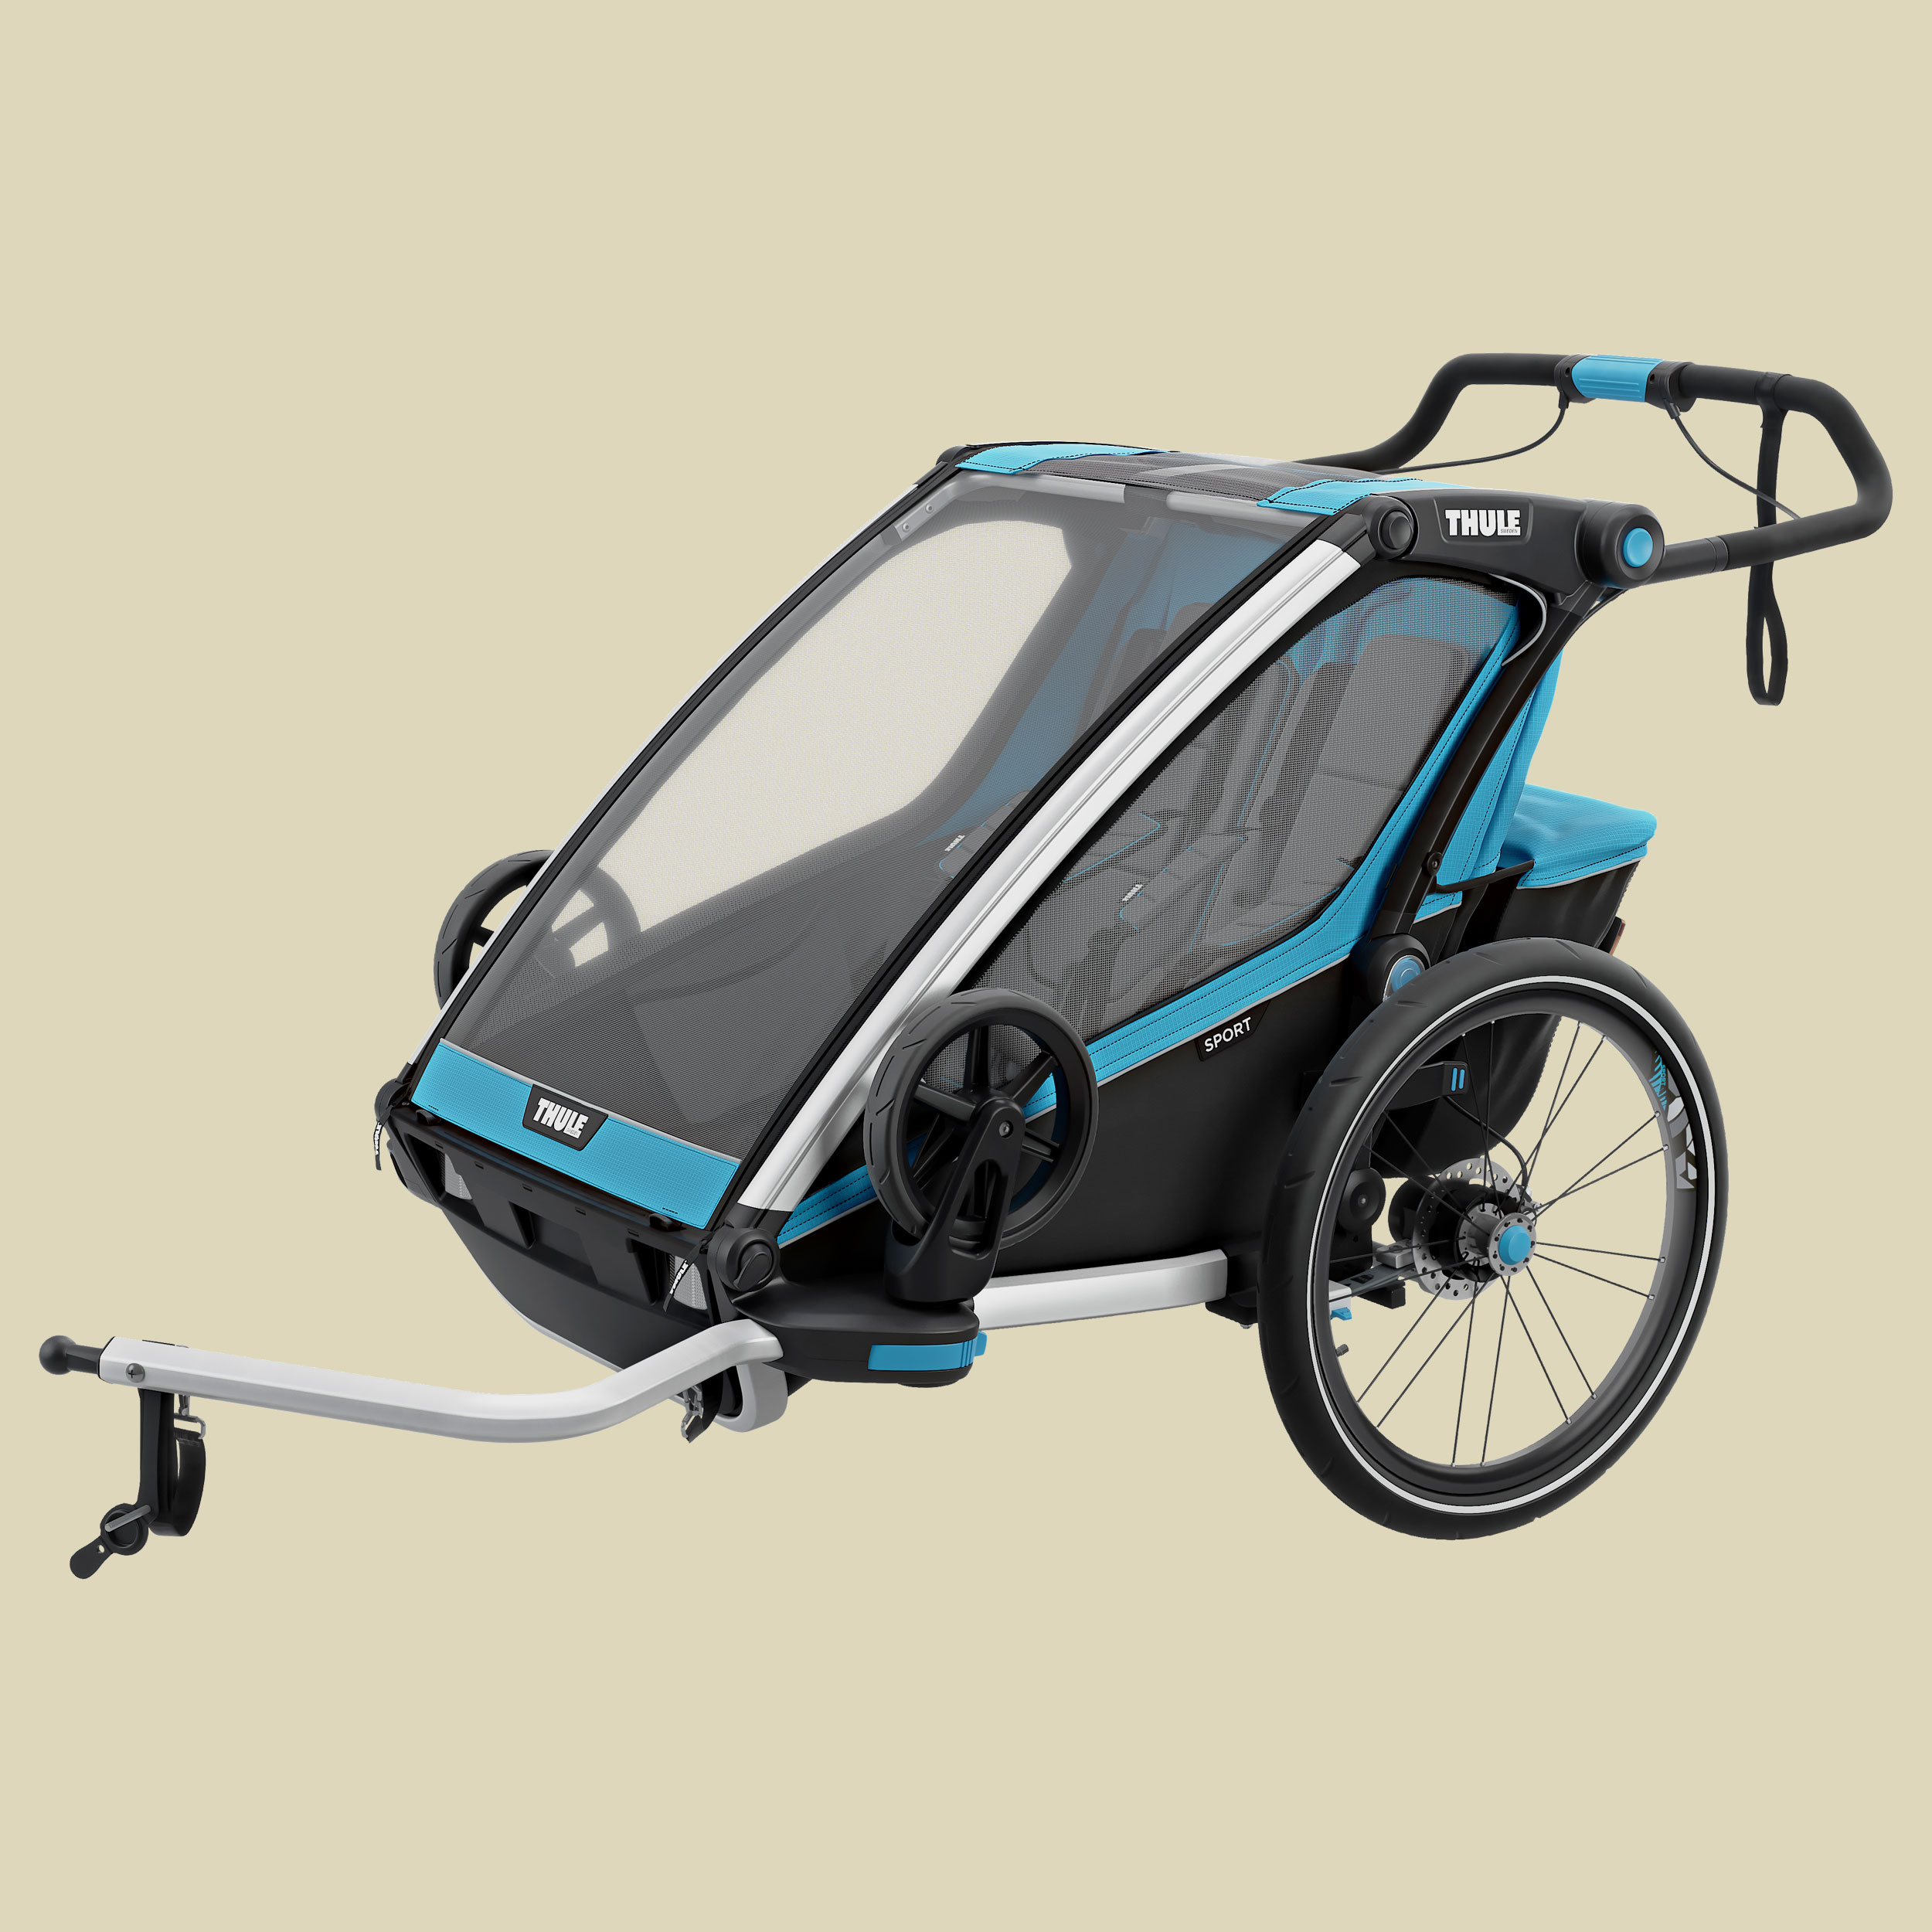 Chariot Sport 2 mit StVZO-Beleuchtung Farbe thule blue/black